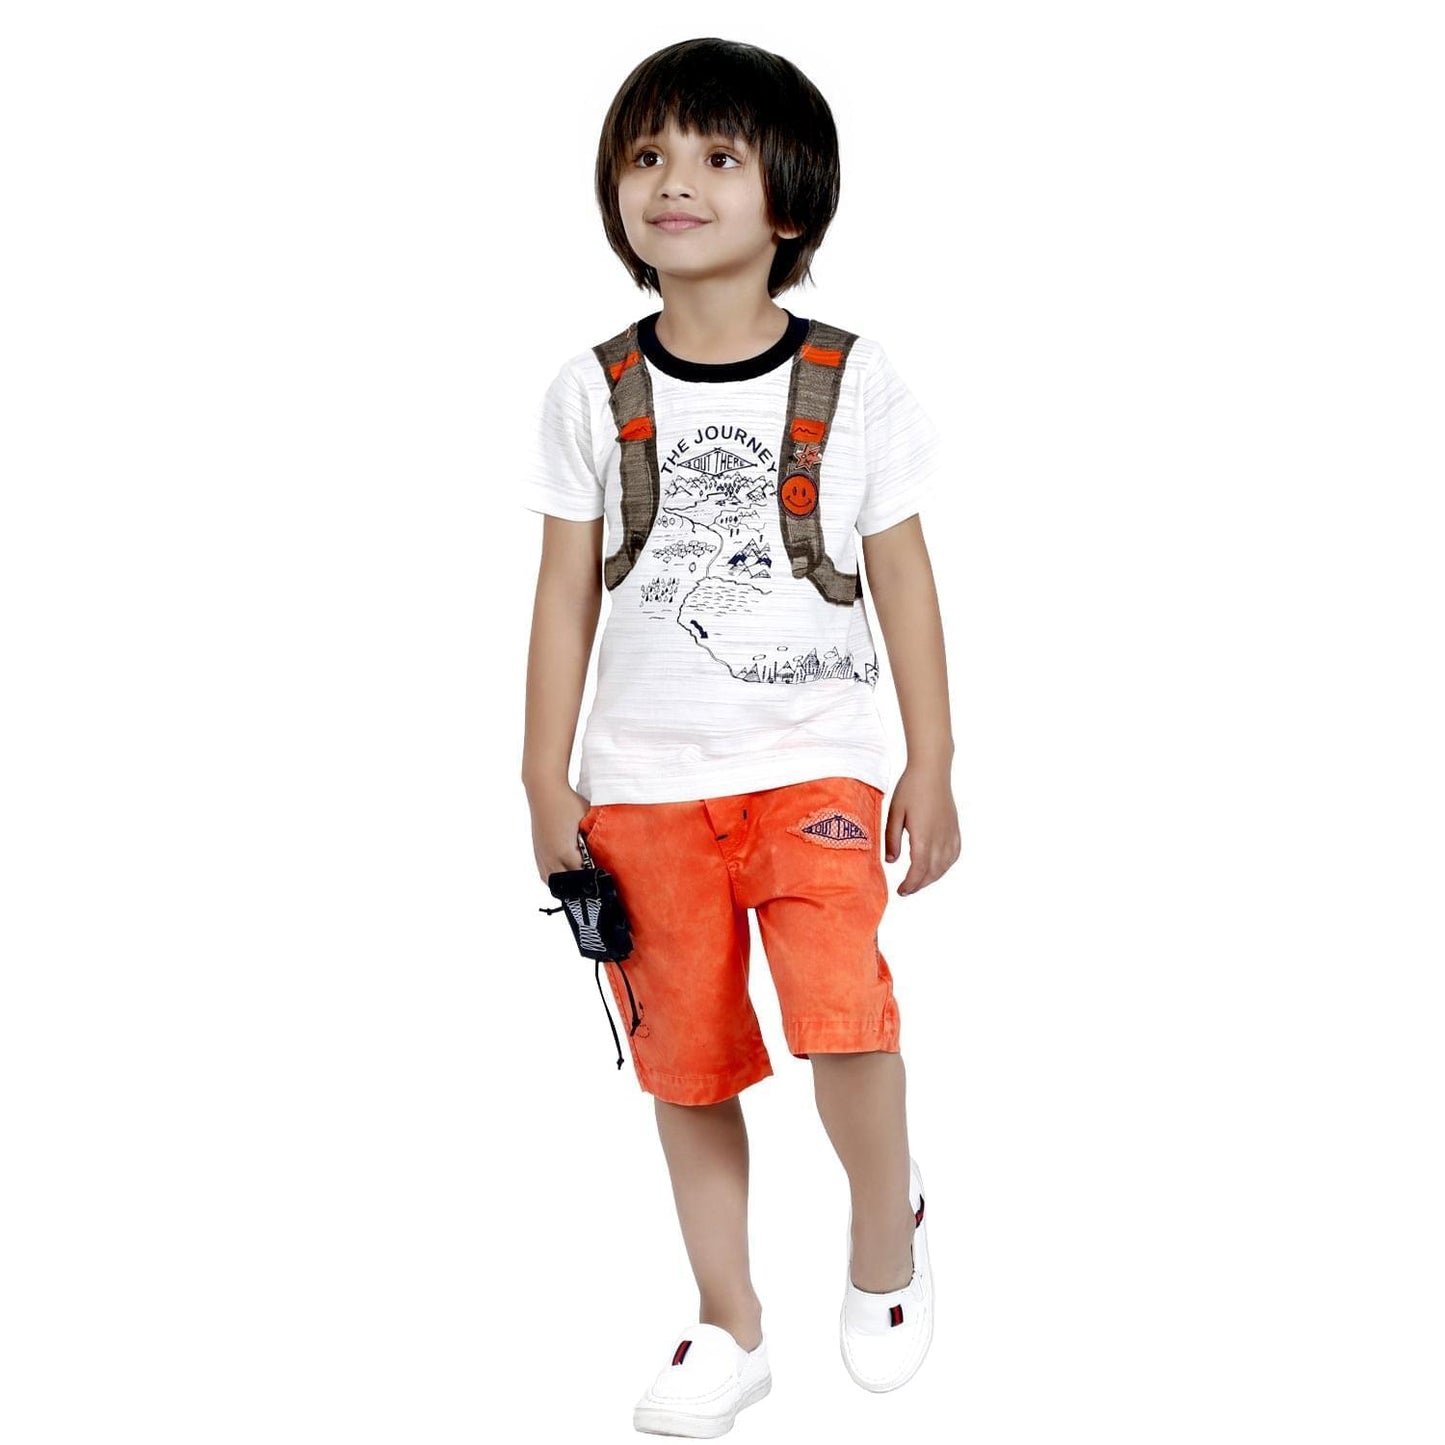 Bad Boys Casual Wear Outfit with Stylish T-shirt and Shorts